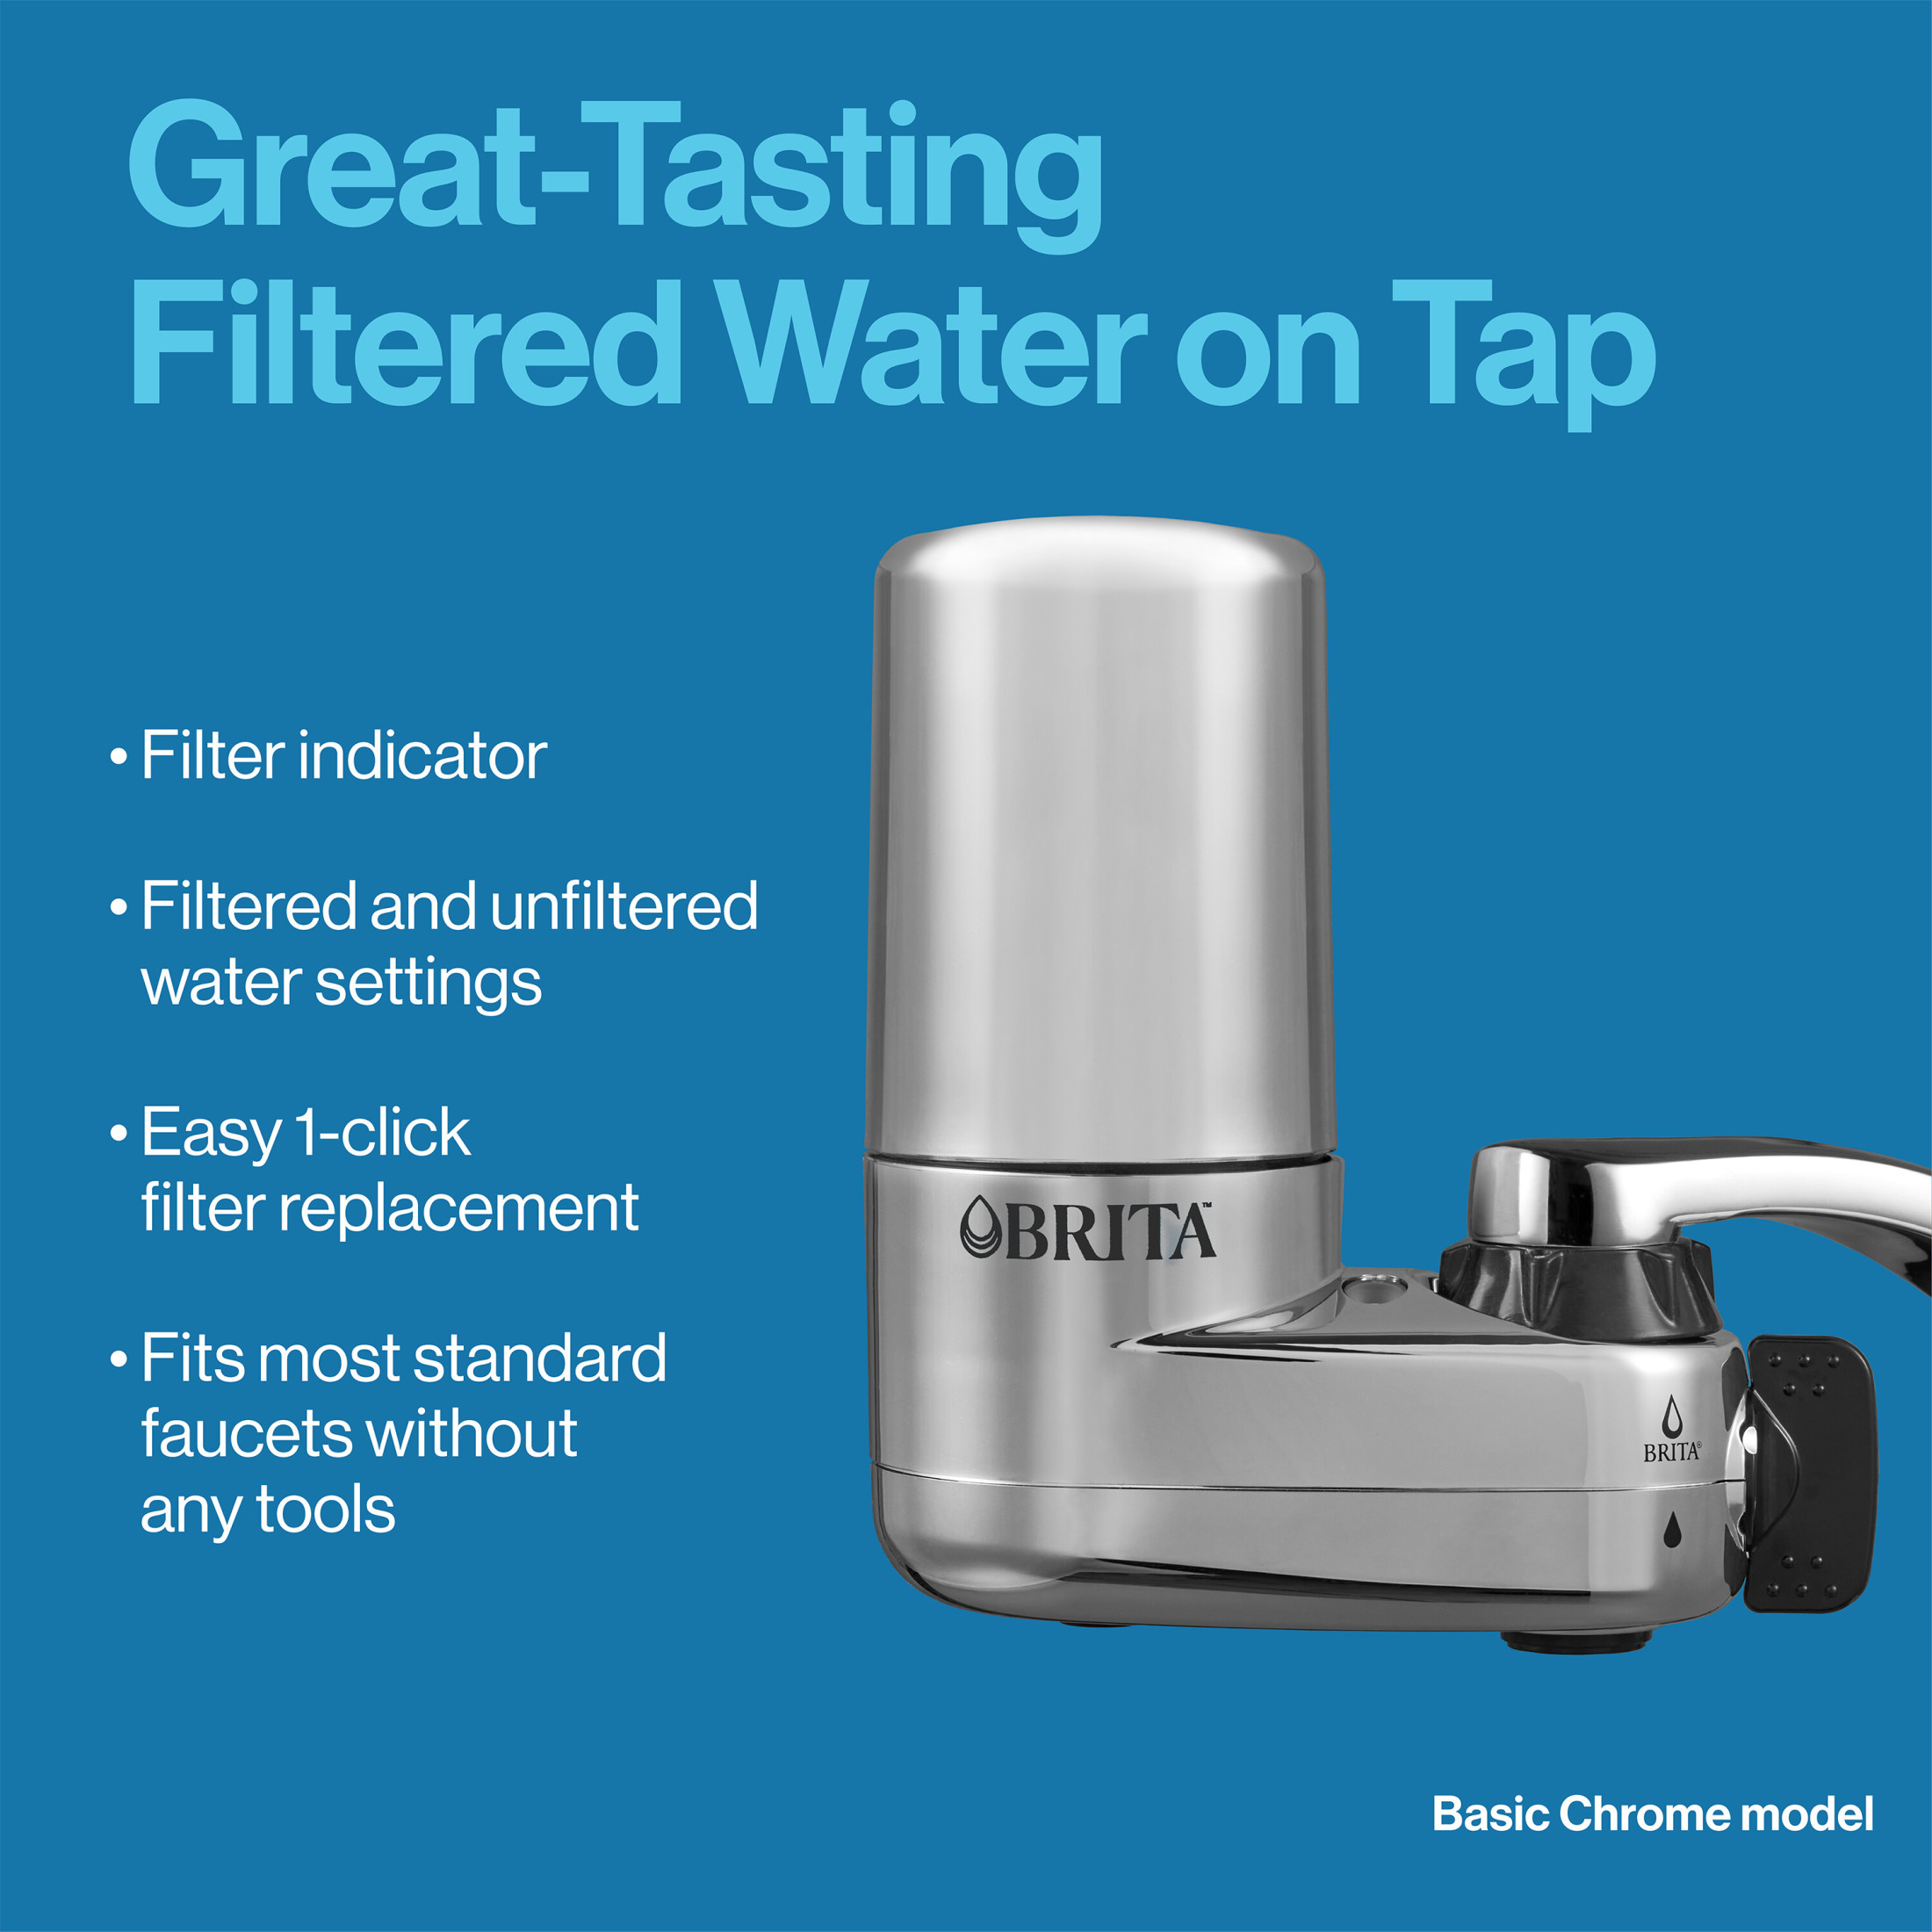 Brita Elite Water Faucet Filtration Mount System, Fits Standard Faucets, Chrome, Includes 1 Filter - image 5 of 9